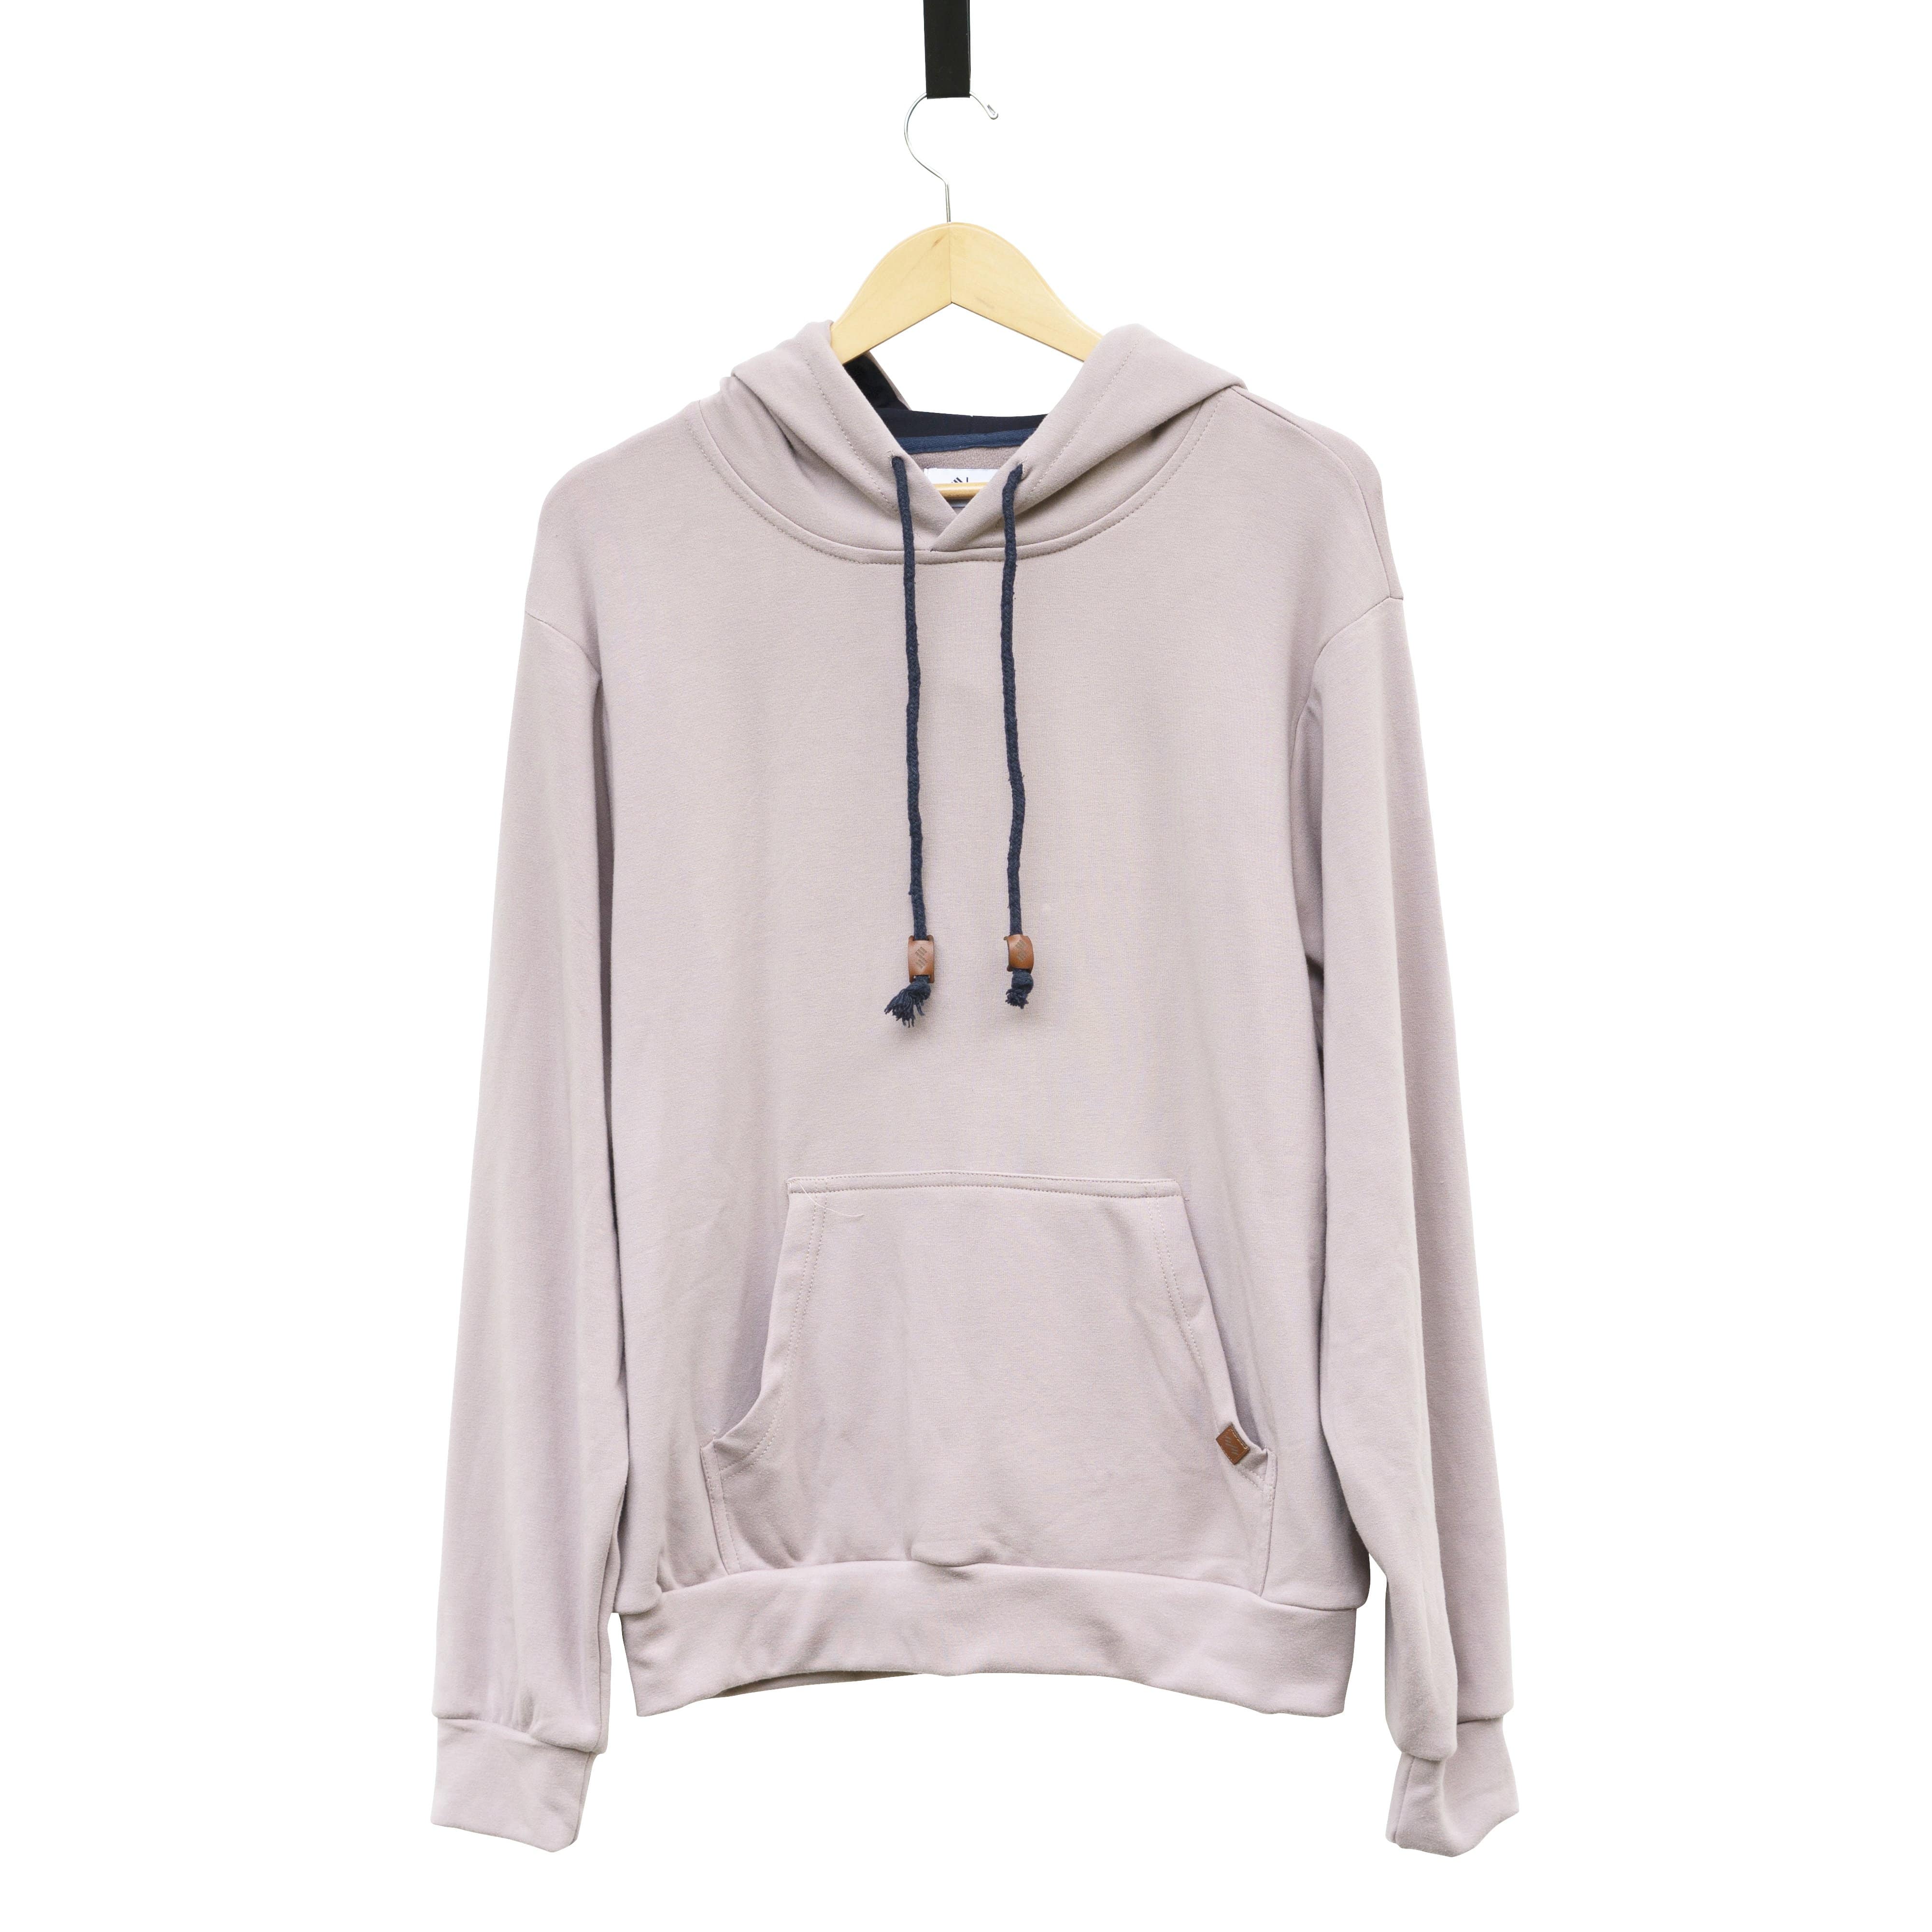 Seagull Gray Cloud Blend Hoodie From SLYK - Front Angle